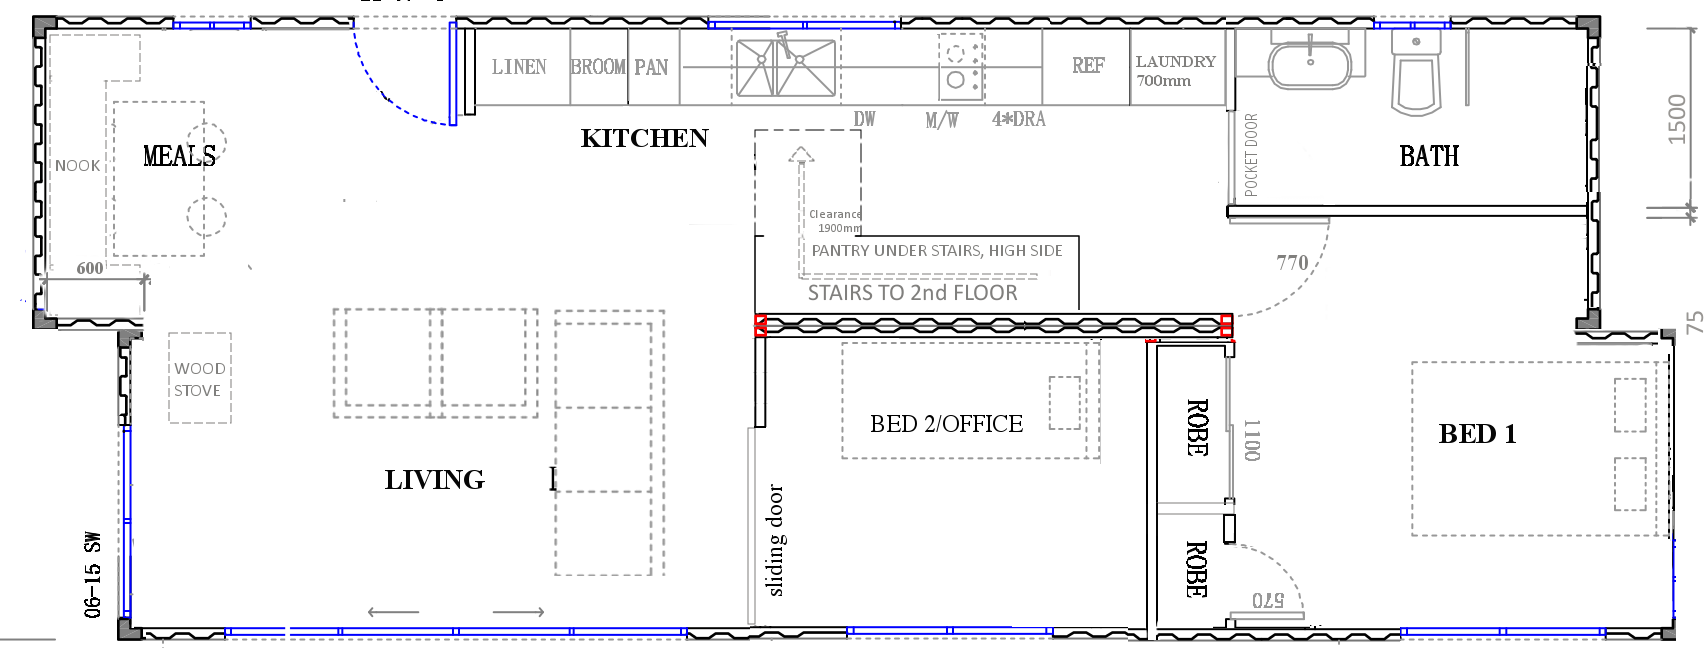 container home floor plan \u2013 Blue Mountains Shipping Container Home
Project